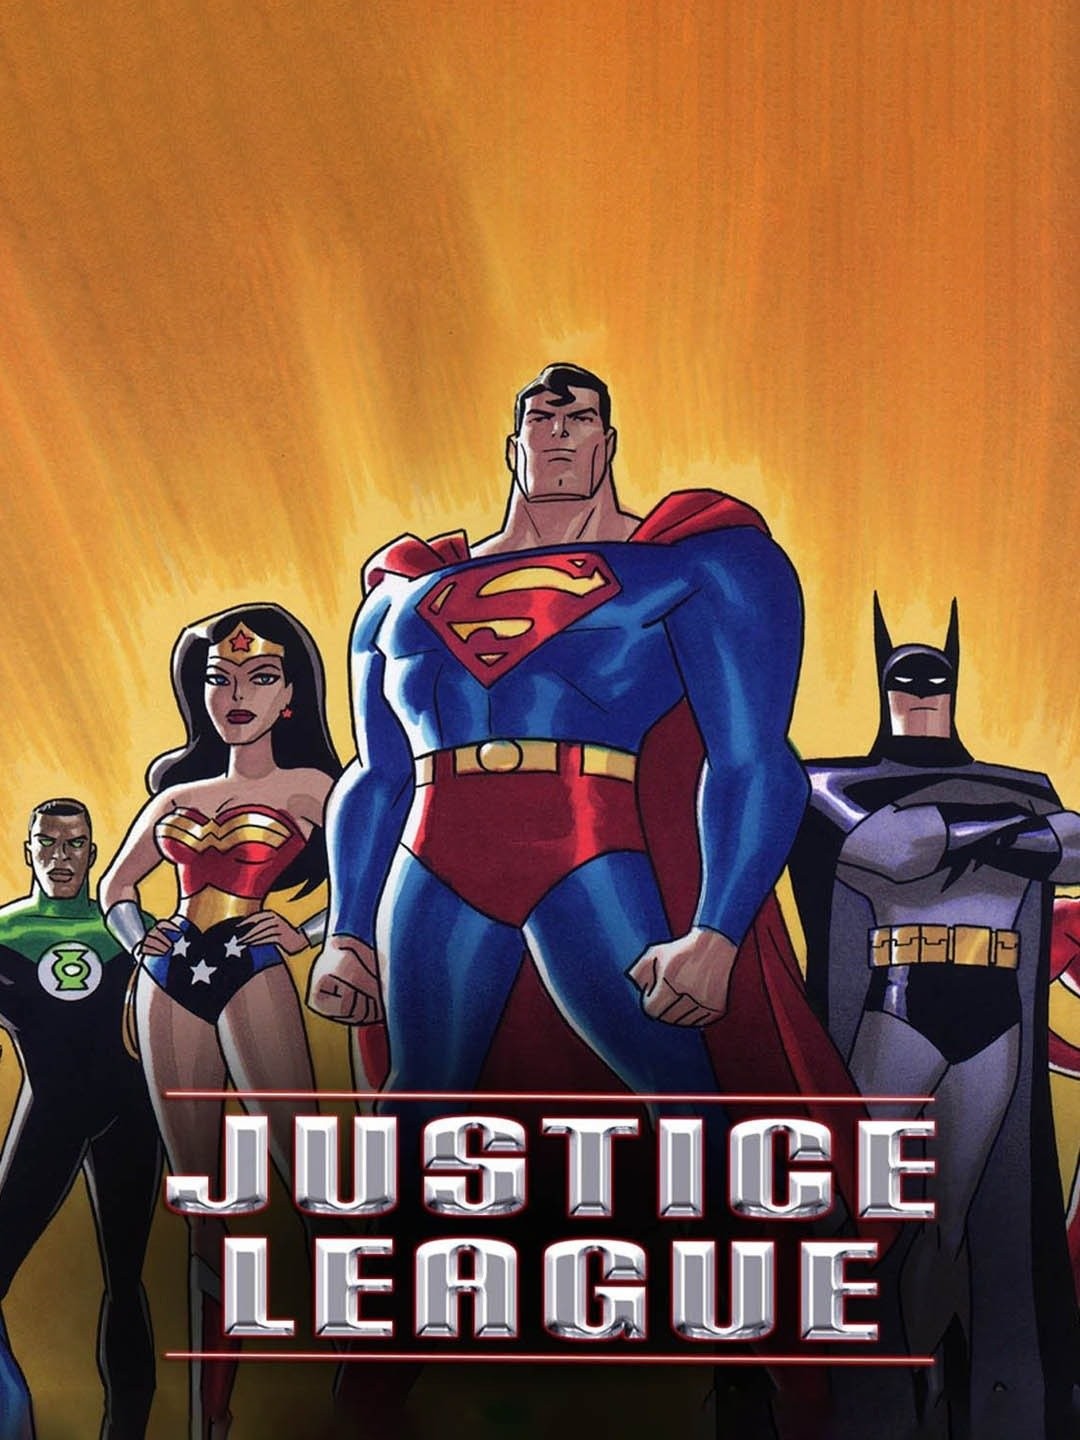 Justice league the first mission